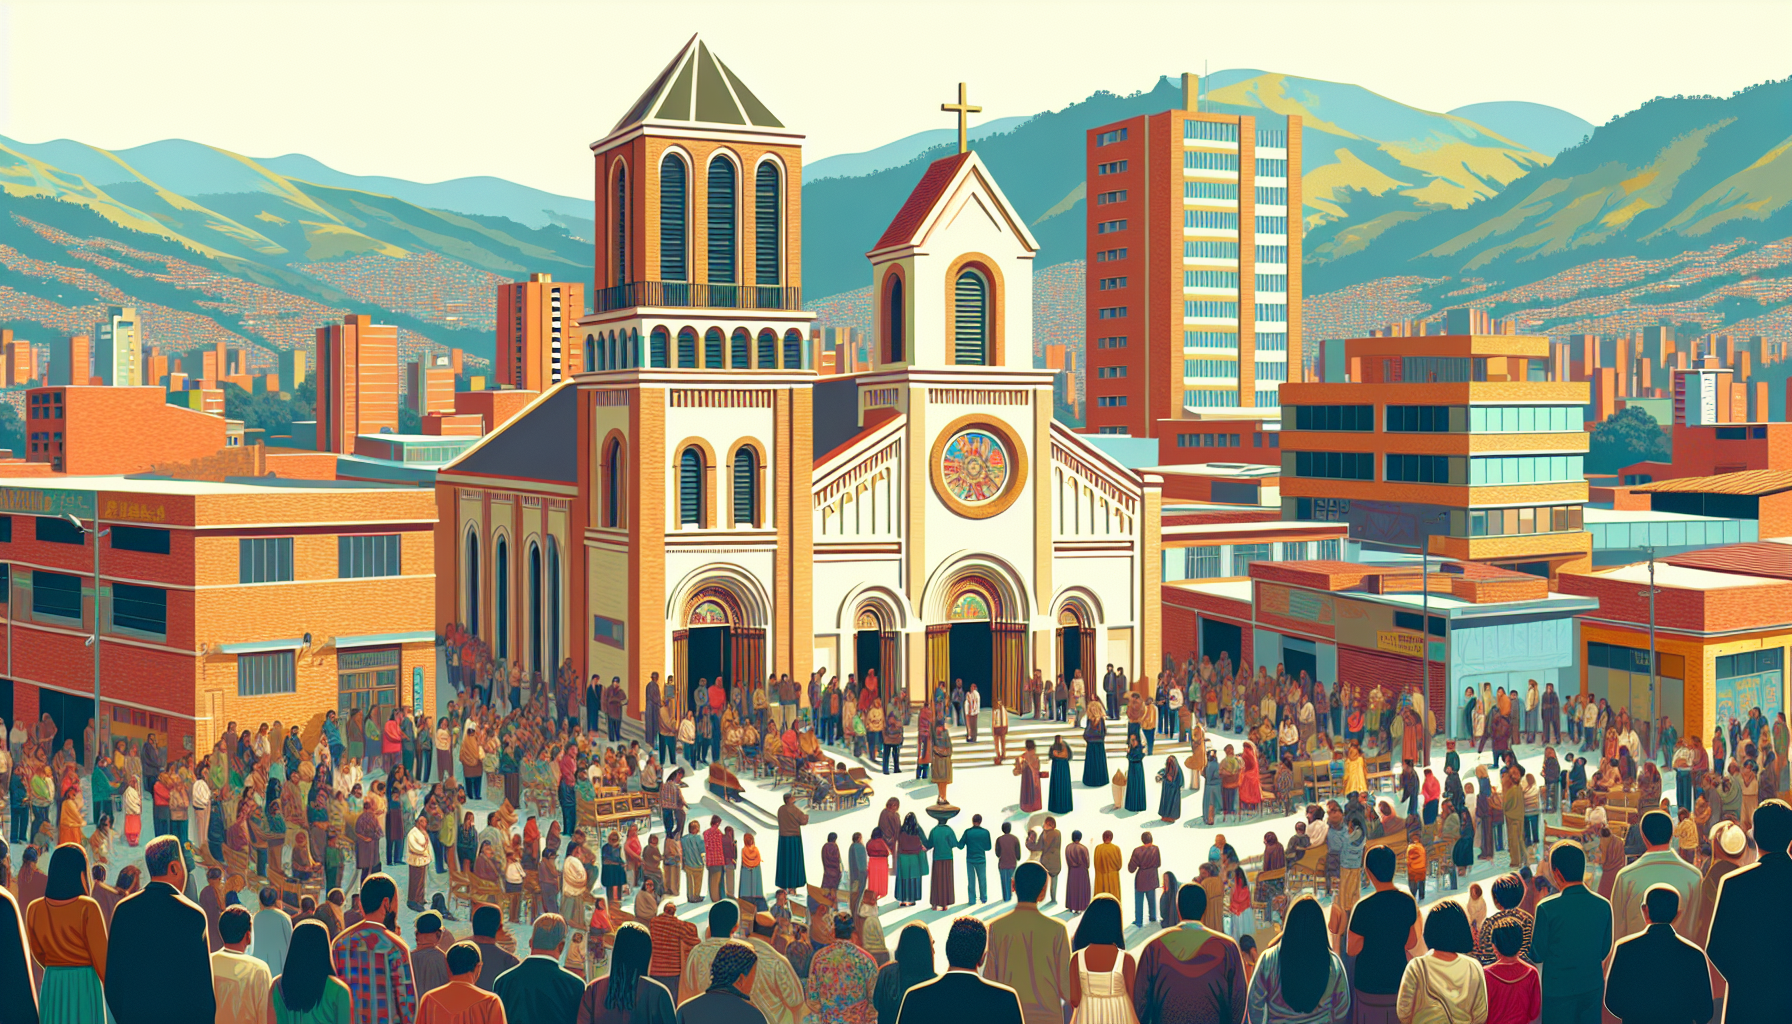 Create an image depicting various Christian churches in Bogotá, Colombia, showcasing their architectural styles and vibrant community life. Include scenes of people engaging in worship, socializing, a